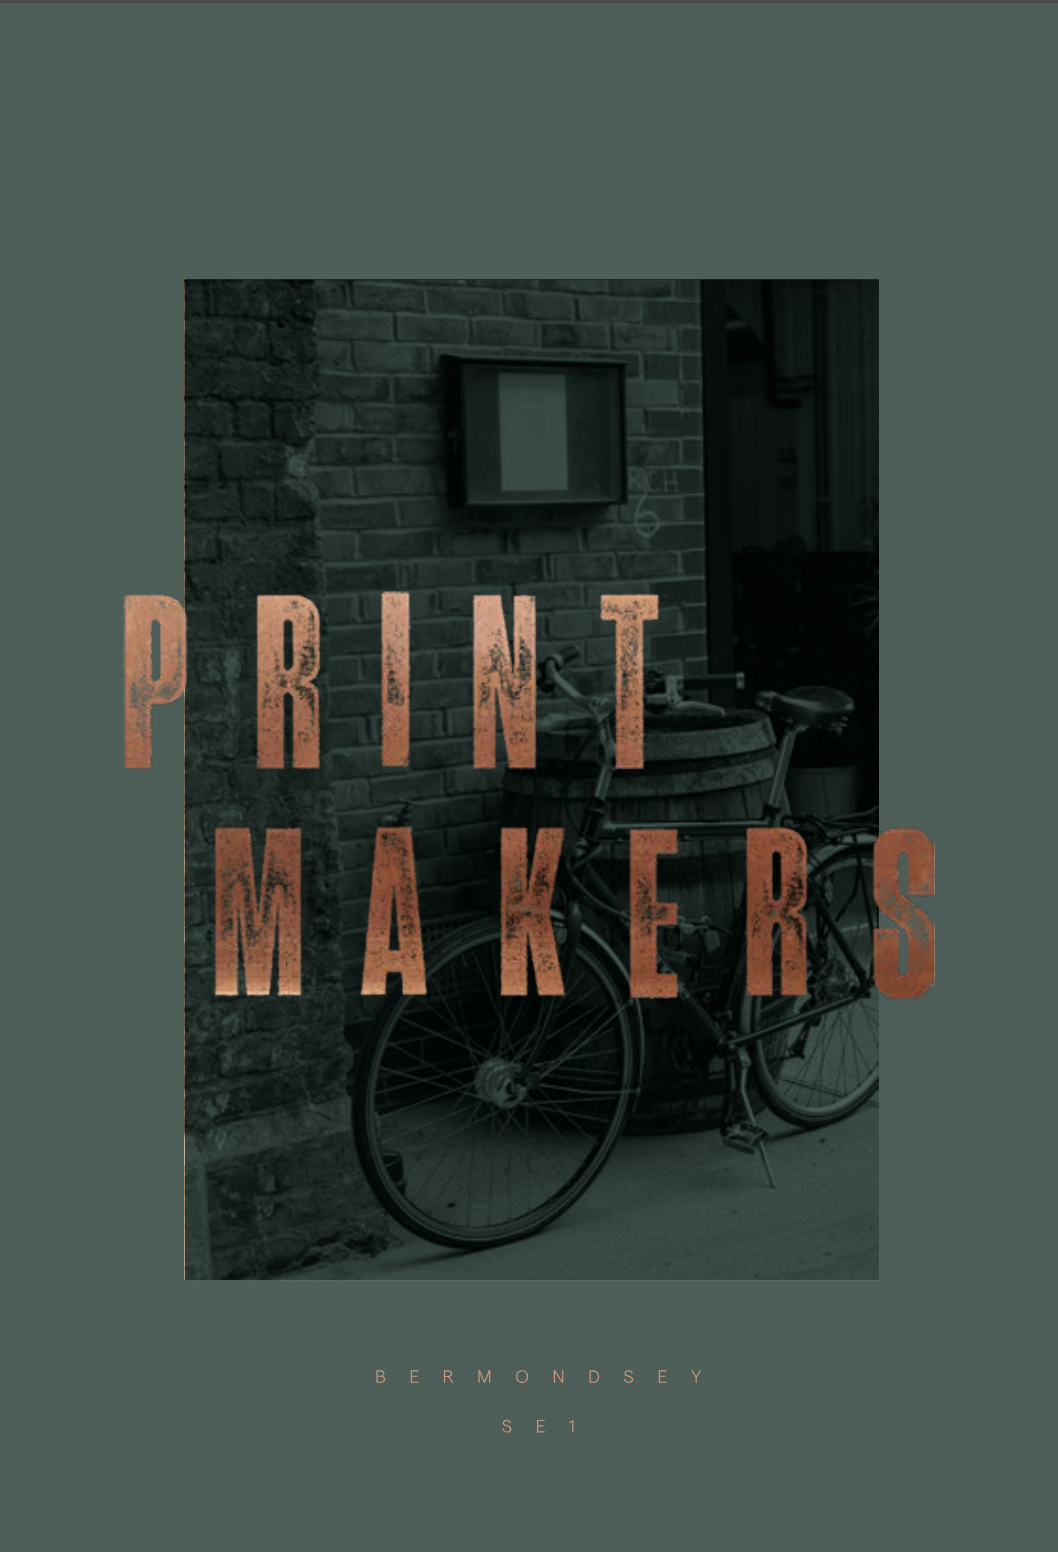 Show apartment launch at Print Makers